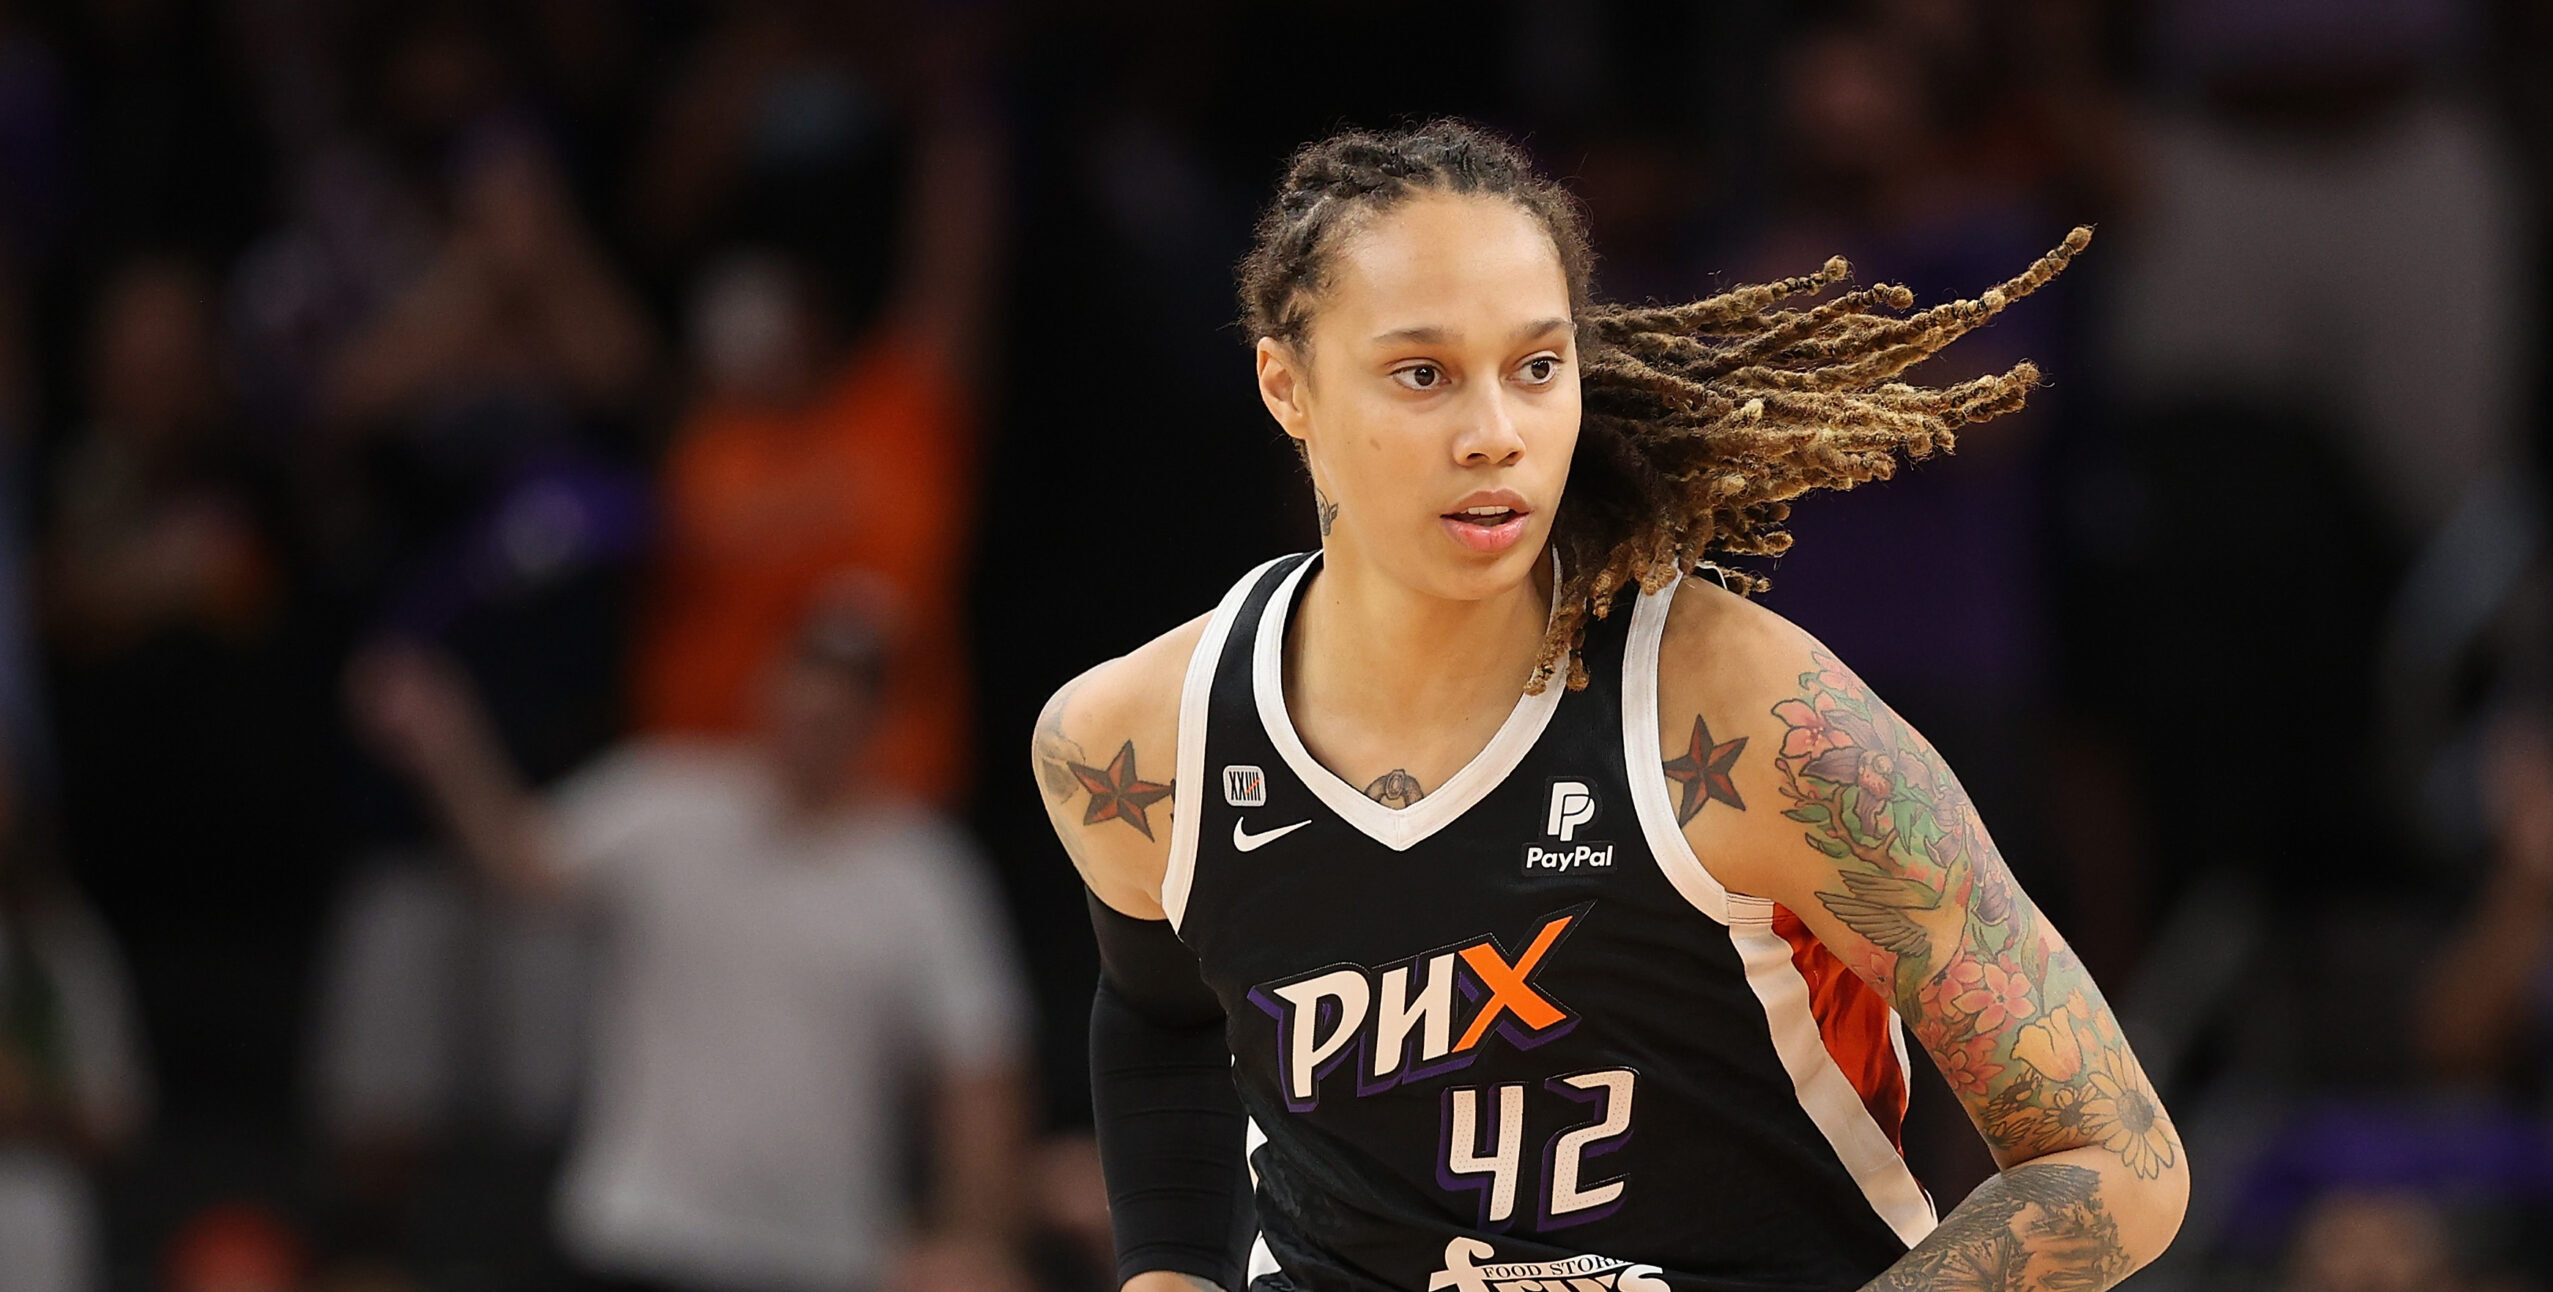 WNBA Player Brittney Griner Detained In Russia